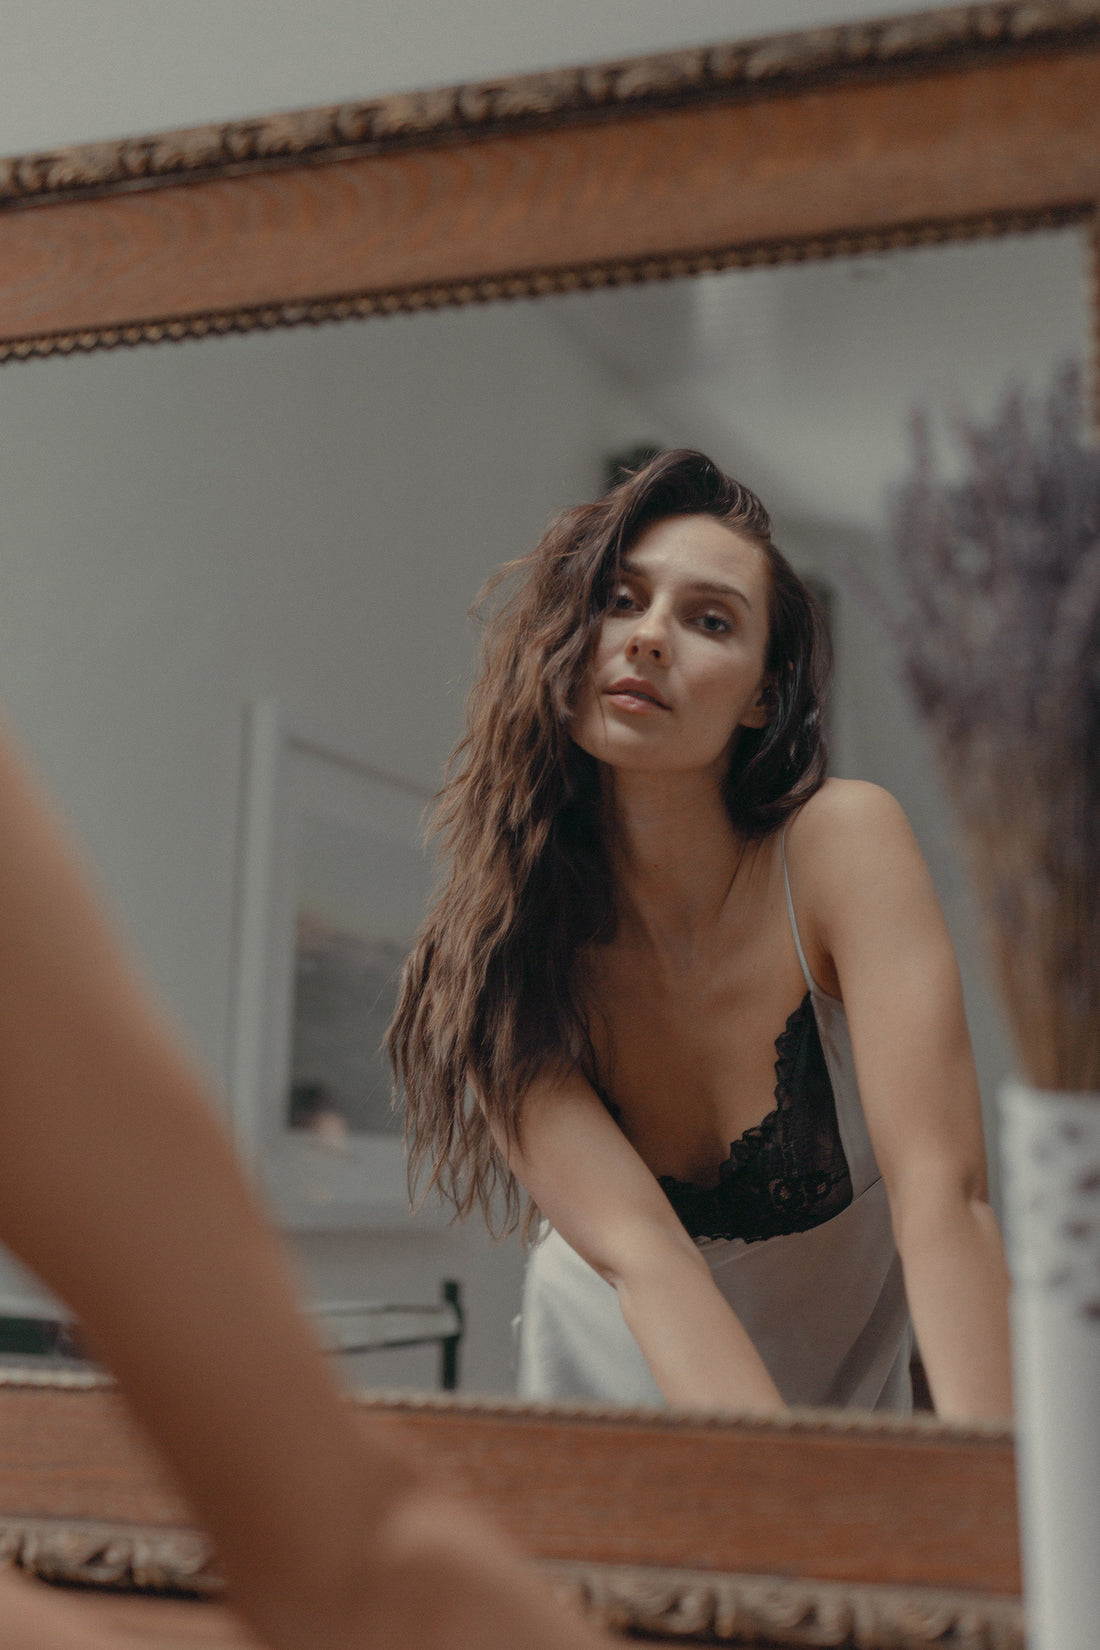 How to Be More Confident in Everyday Lingerie